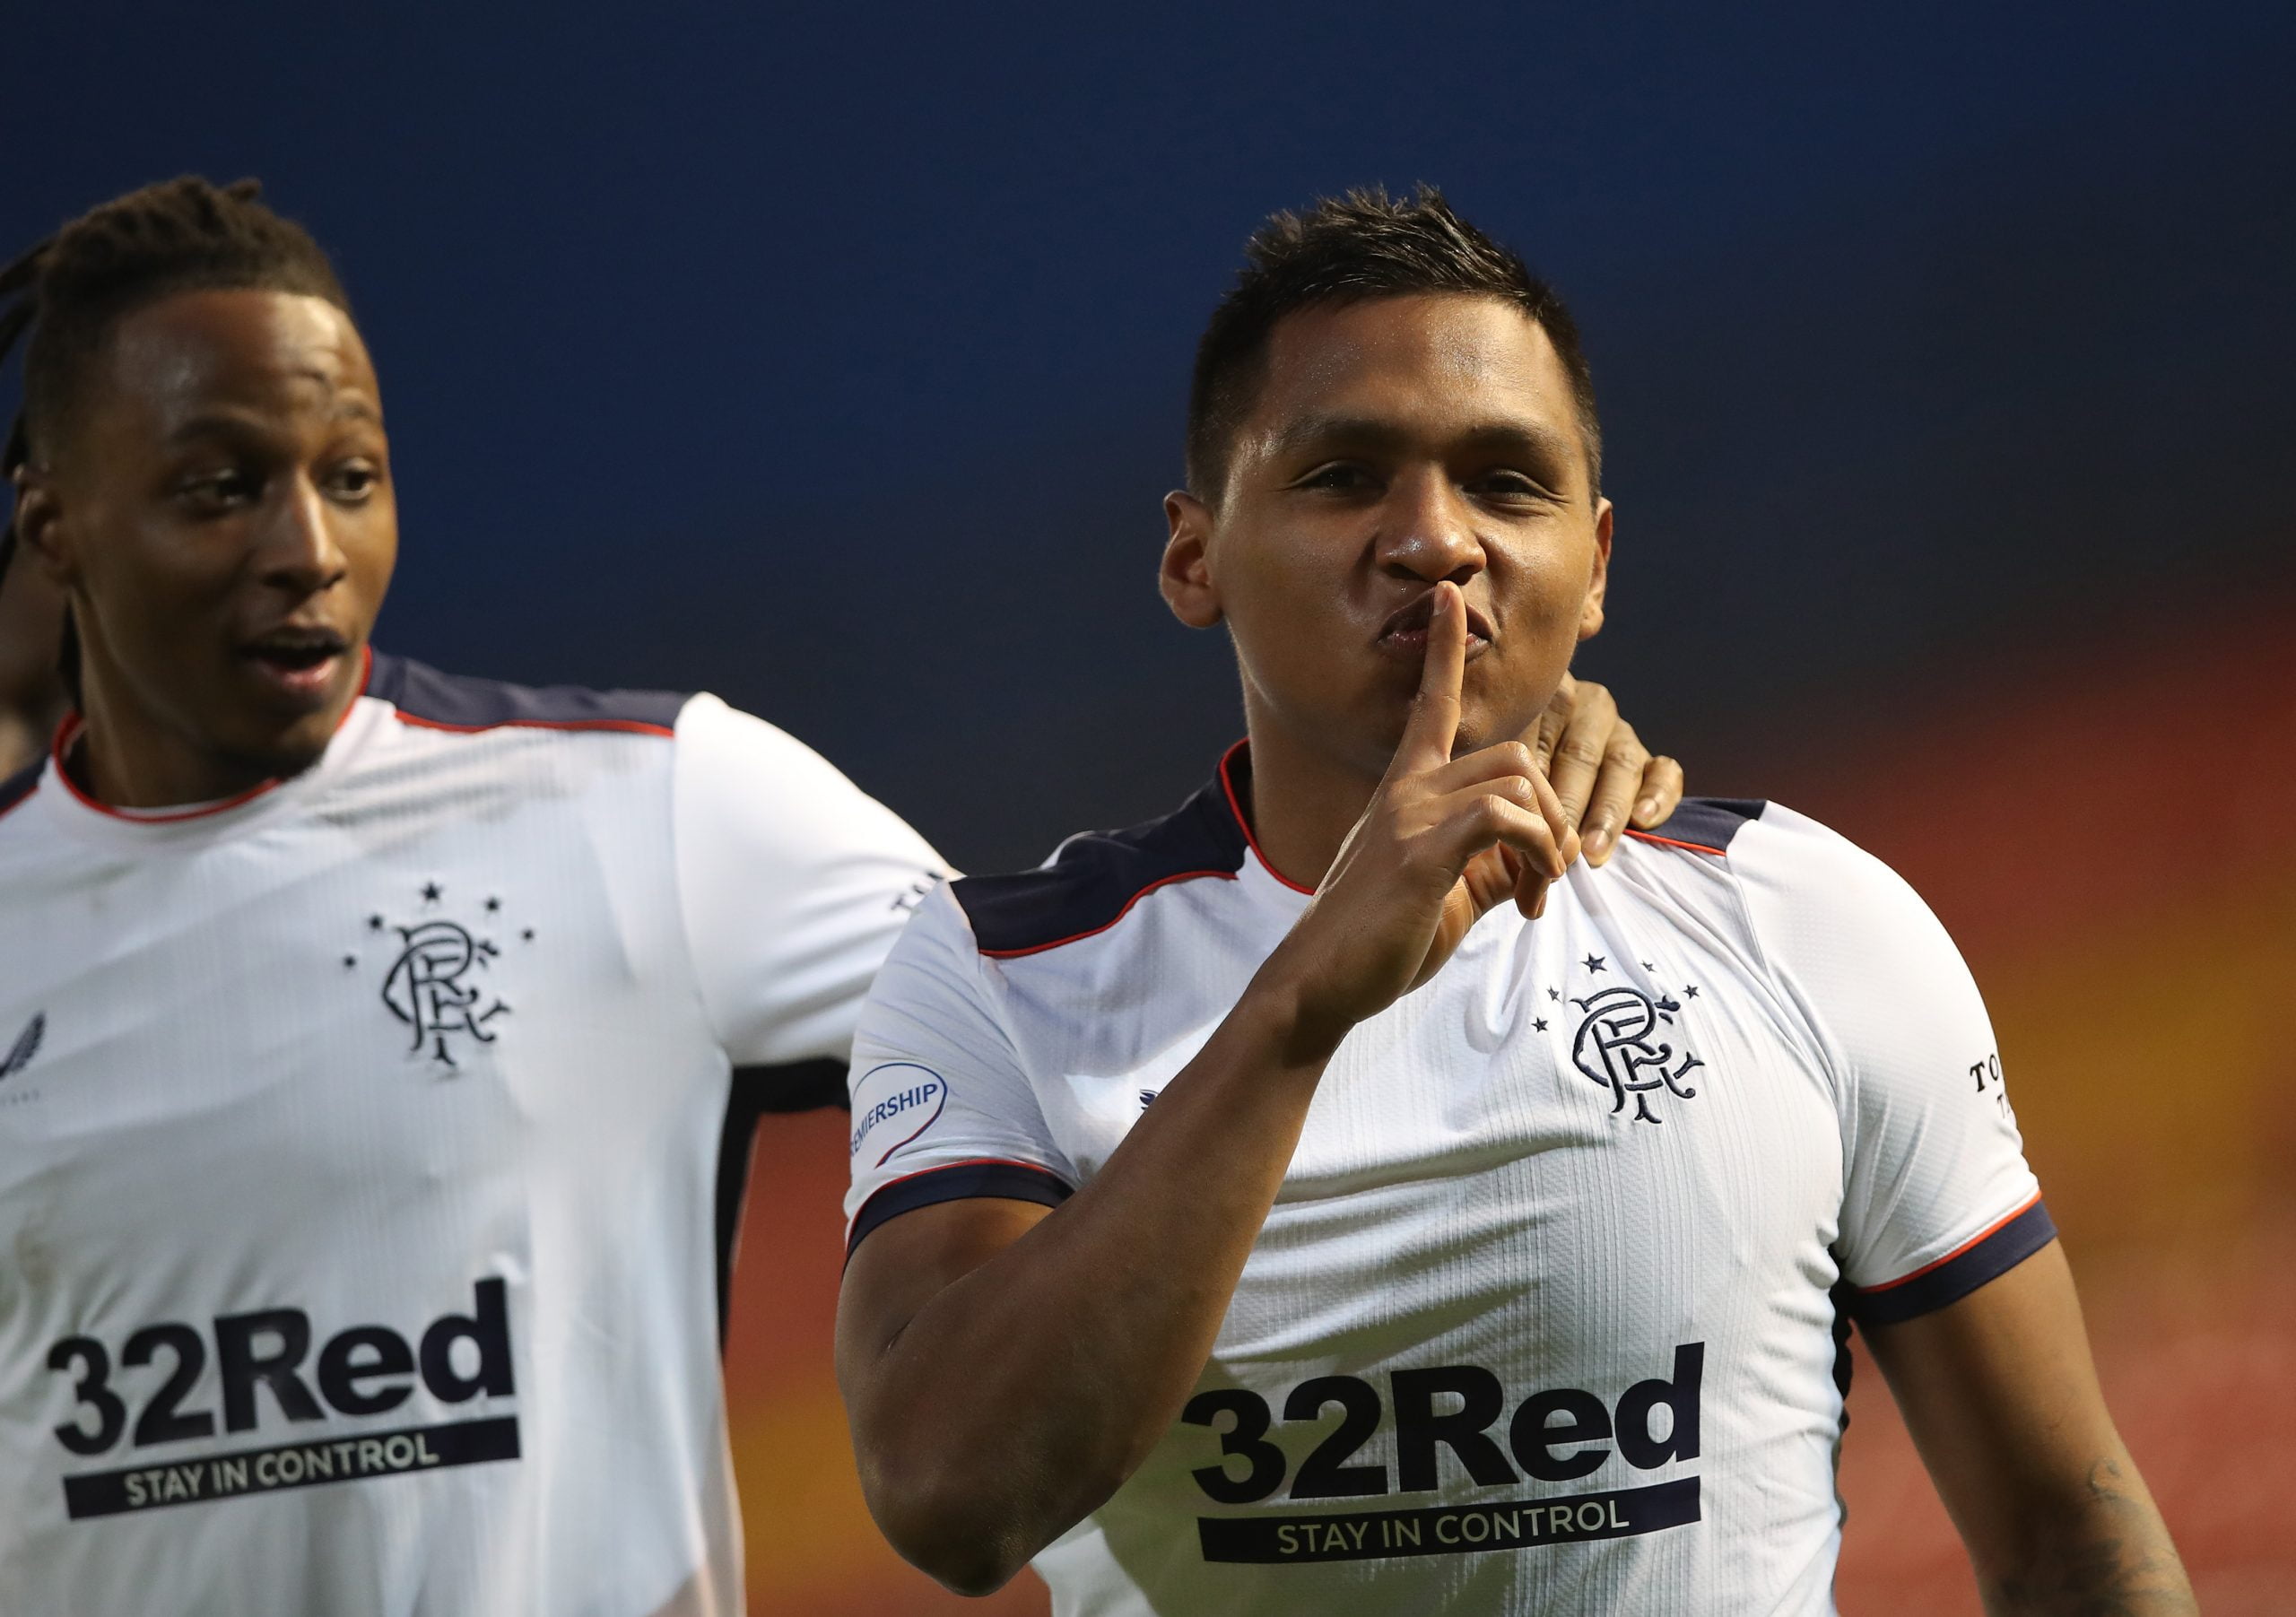 ABERDEEN, SCOTLAND - JANUARY 10: Alfredo Morelos of Rangers  celebrates after scoring their team's second goal during the Ladbrokes Scottish Premiership match between Aberdeen and Rangers at Pittodrie Stadium on January 10, 2021 in Aberdeen, Scotland. Sporting stadiums around Scotland remain under strict restrictions due to the Coronavirus Pandemic as Government social distancing laws prohibit fans inside venues resulting in games being played behind closed doors. (Photo by Ian MacNicol/Getty Images)